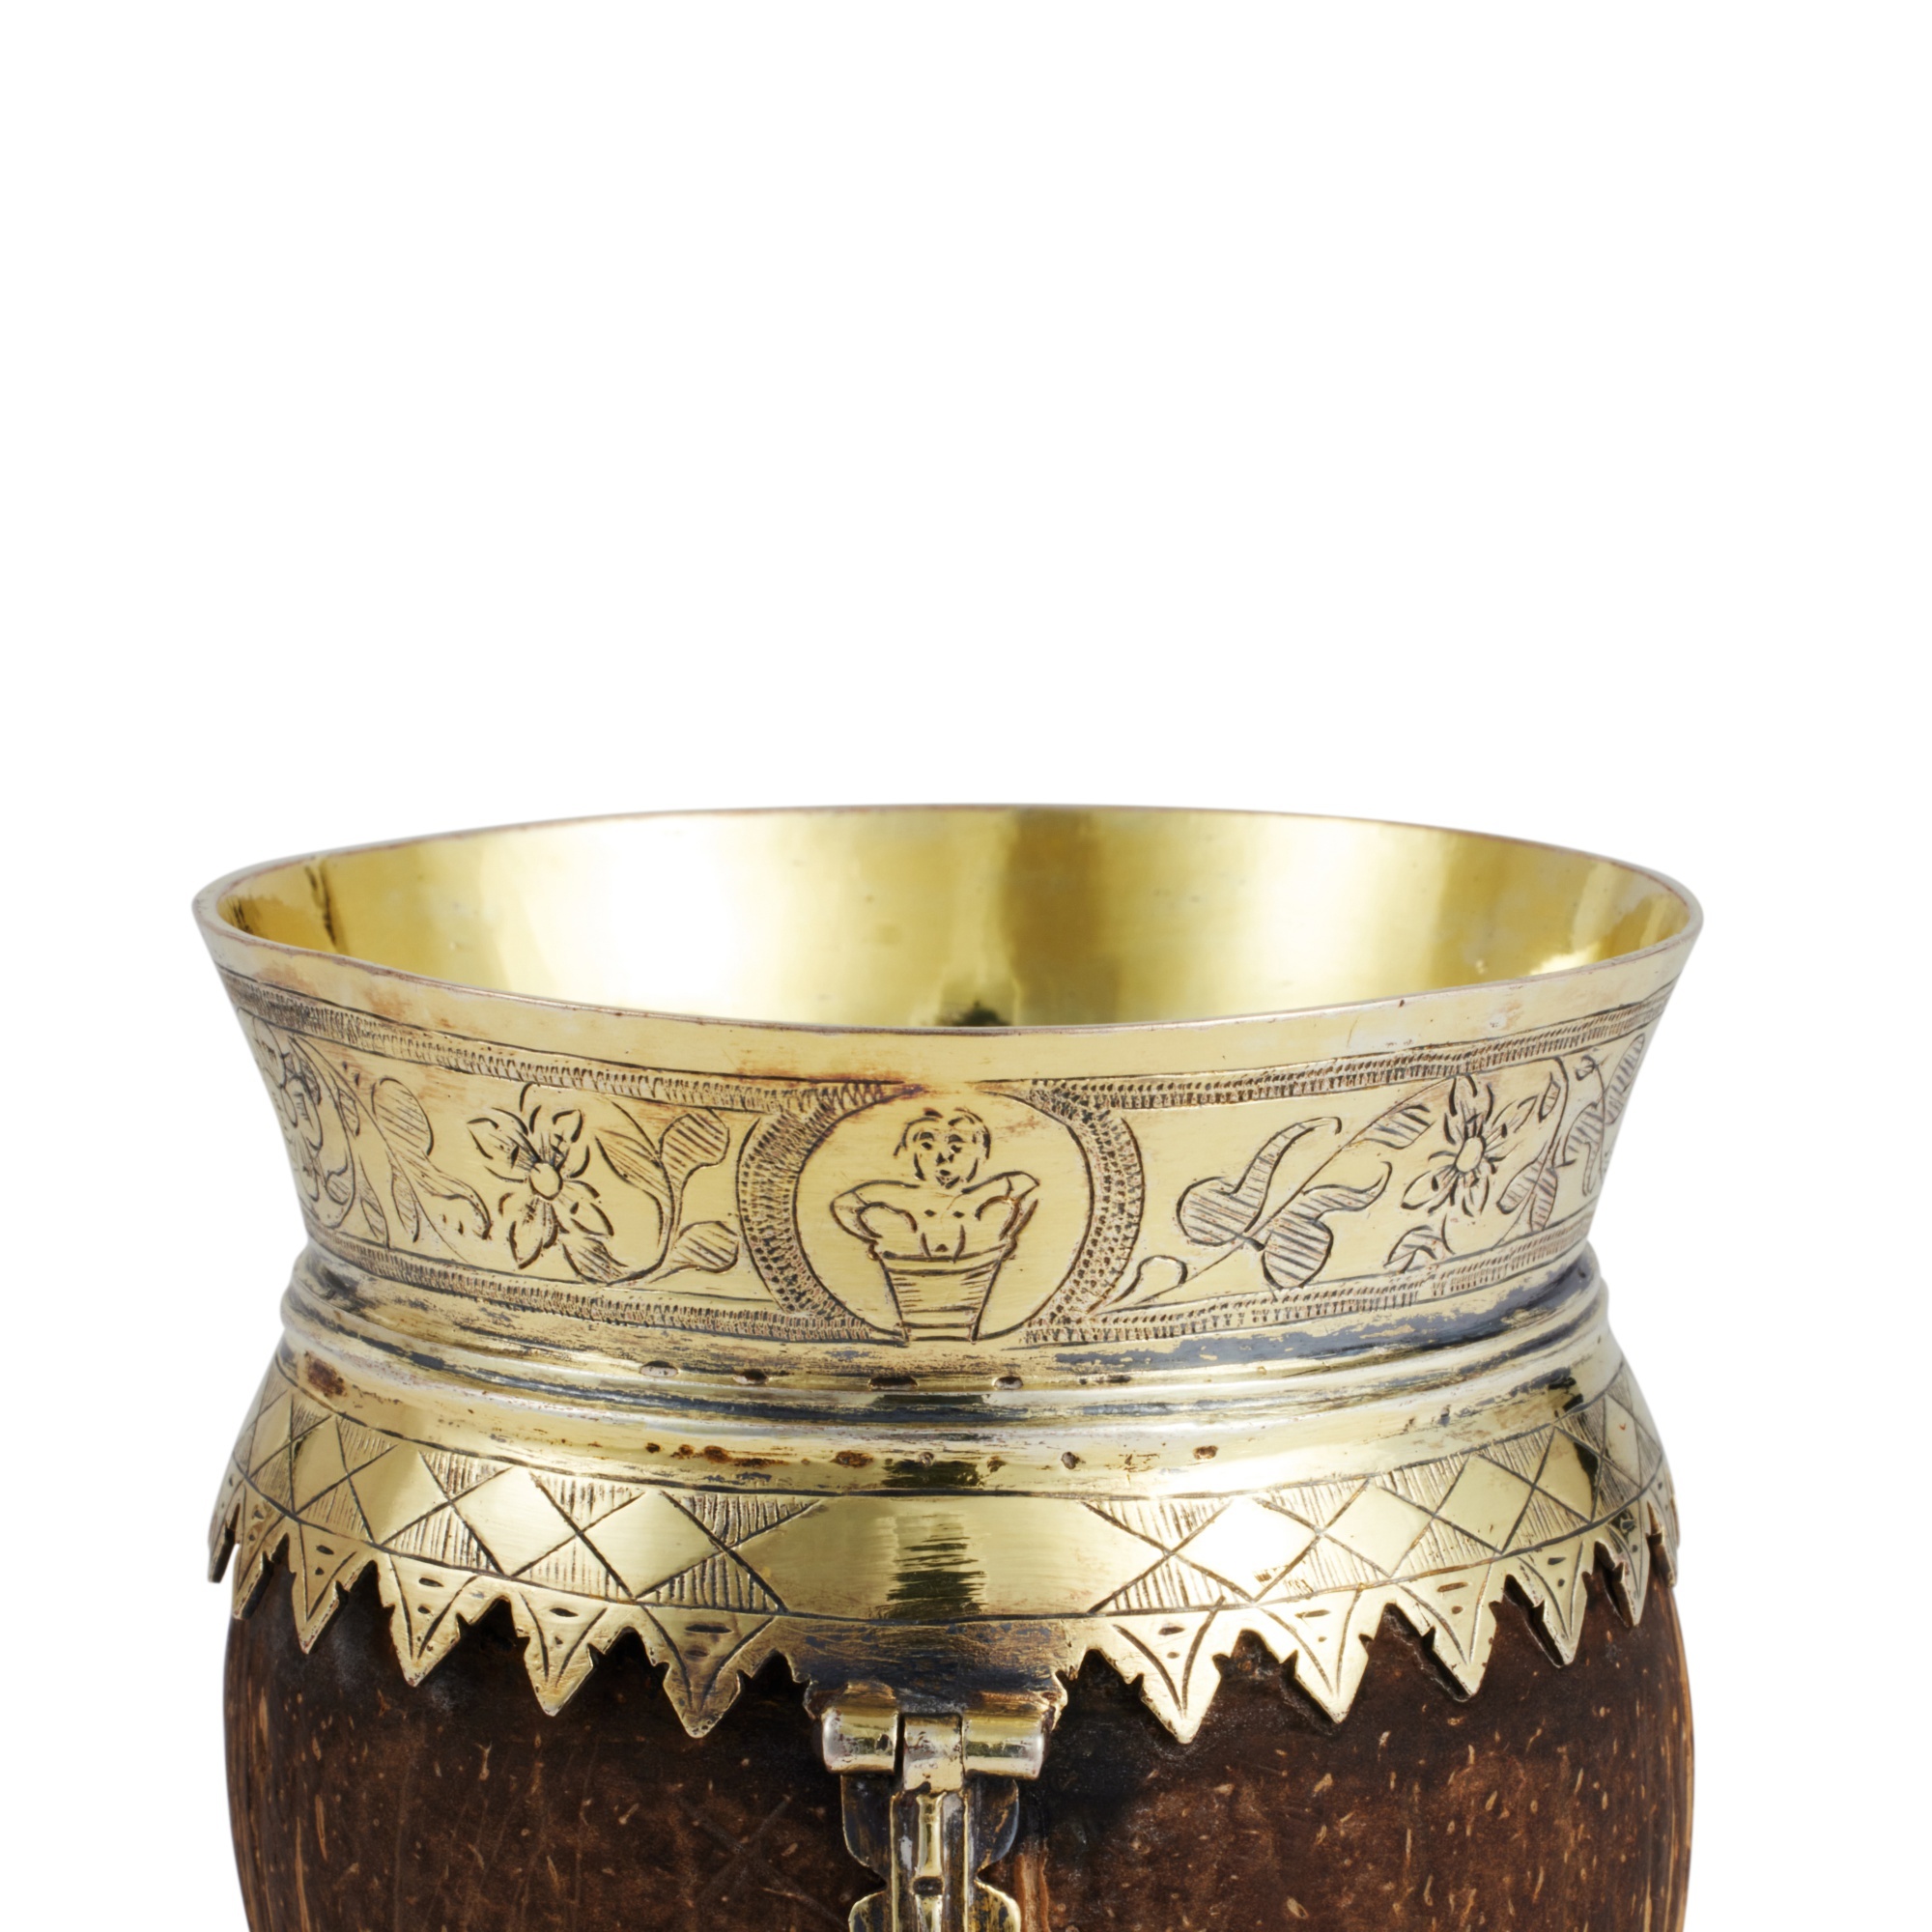 A Silver-Gilt-Mounted Coconut Cup, Probably German, Early 17th Century - Image 4 of 4